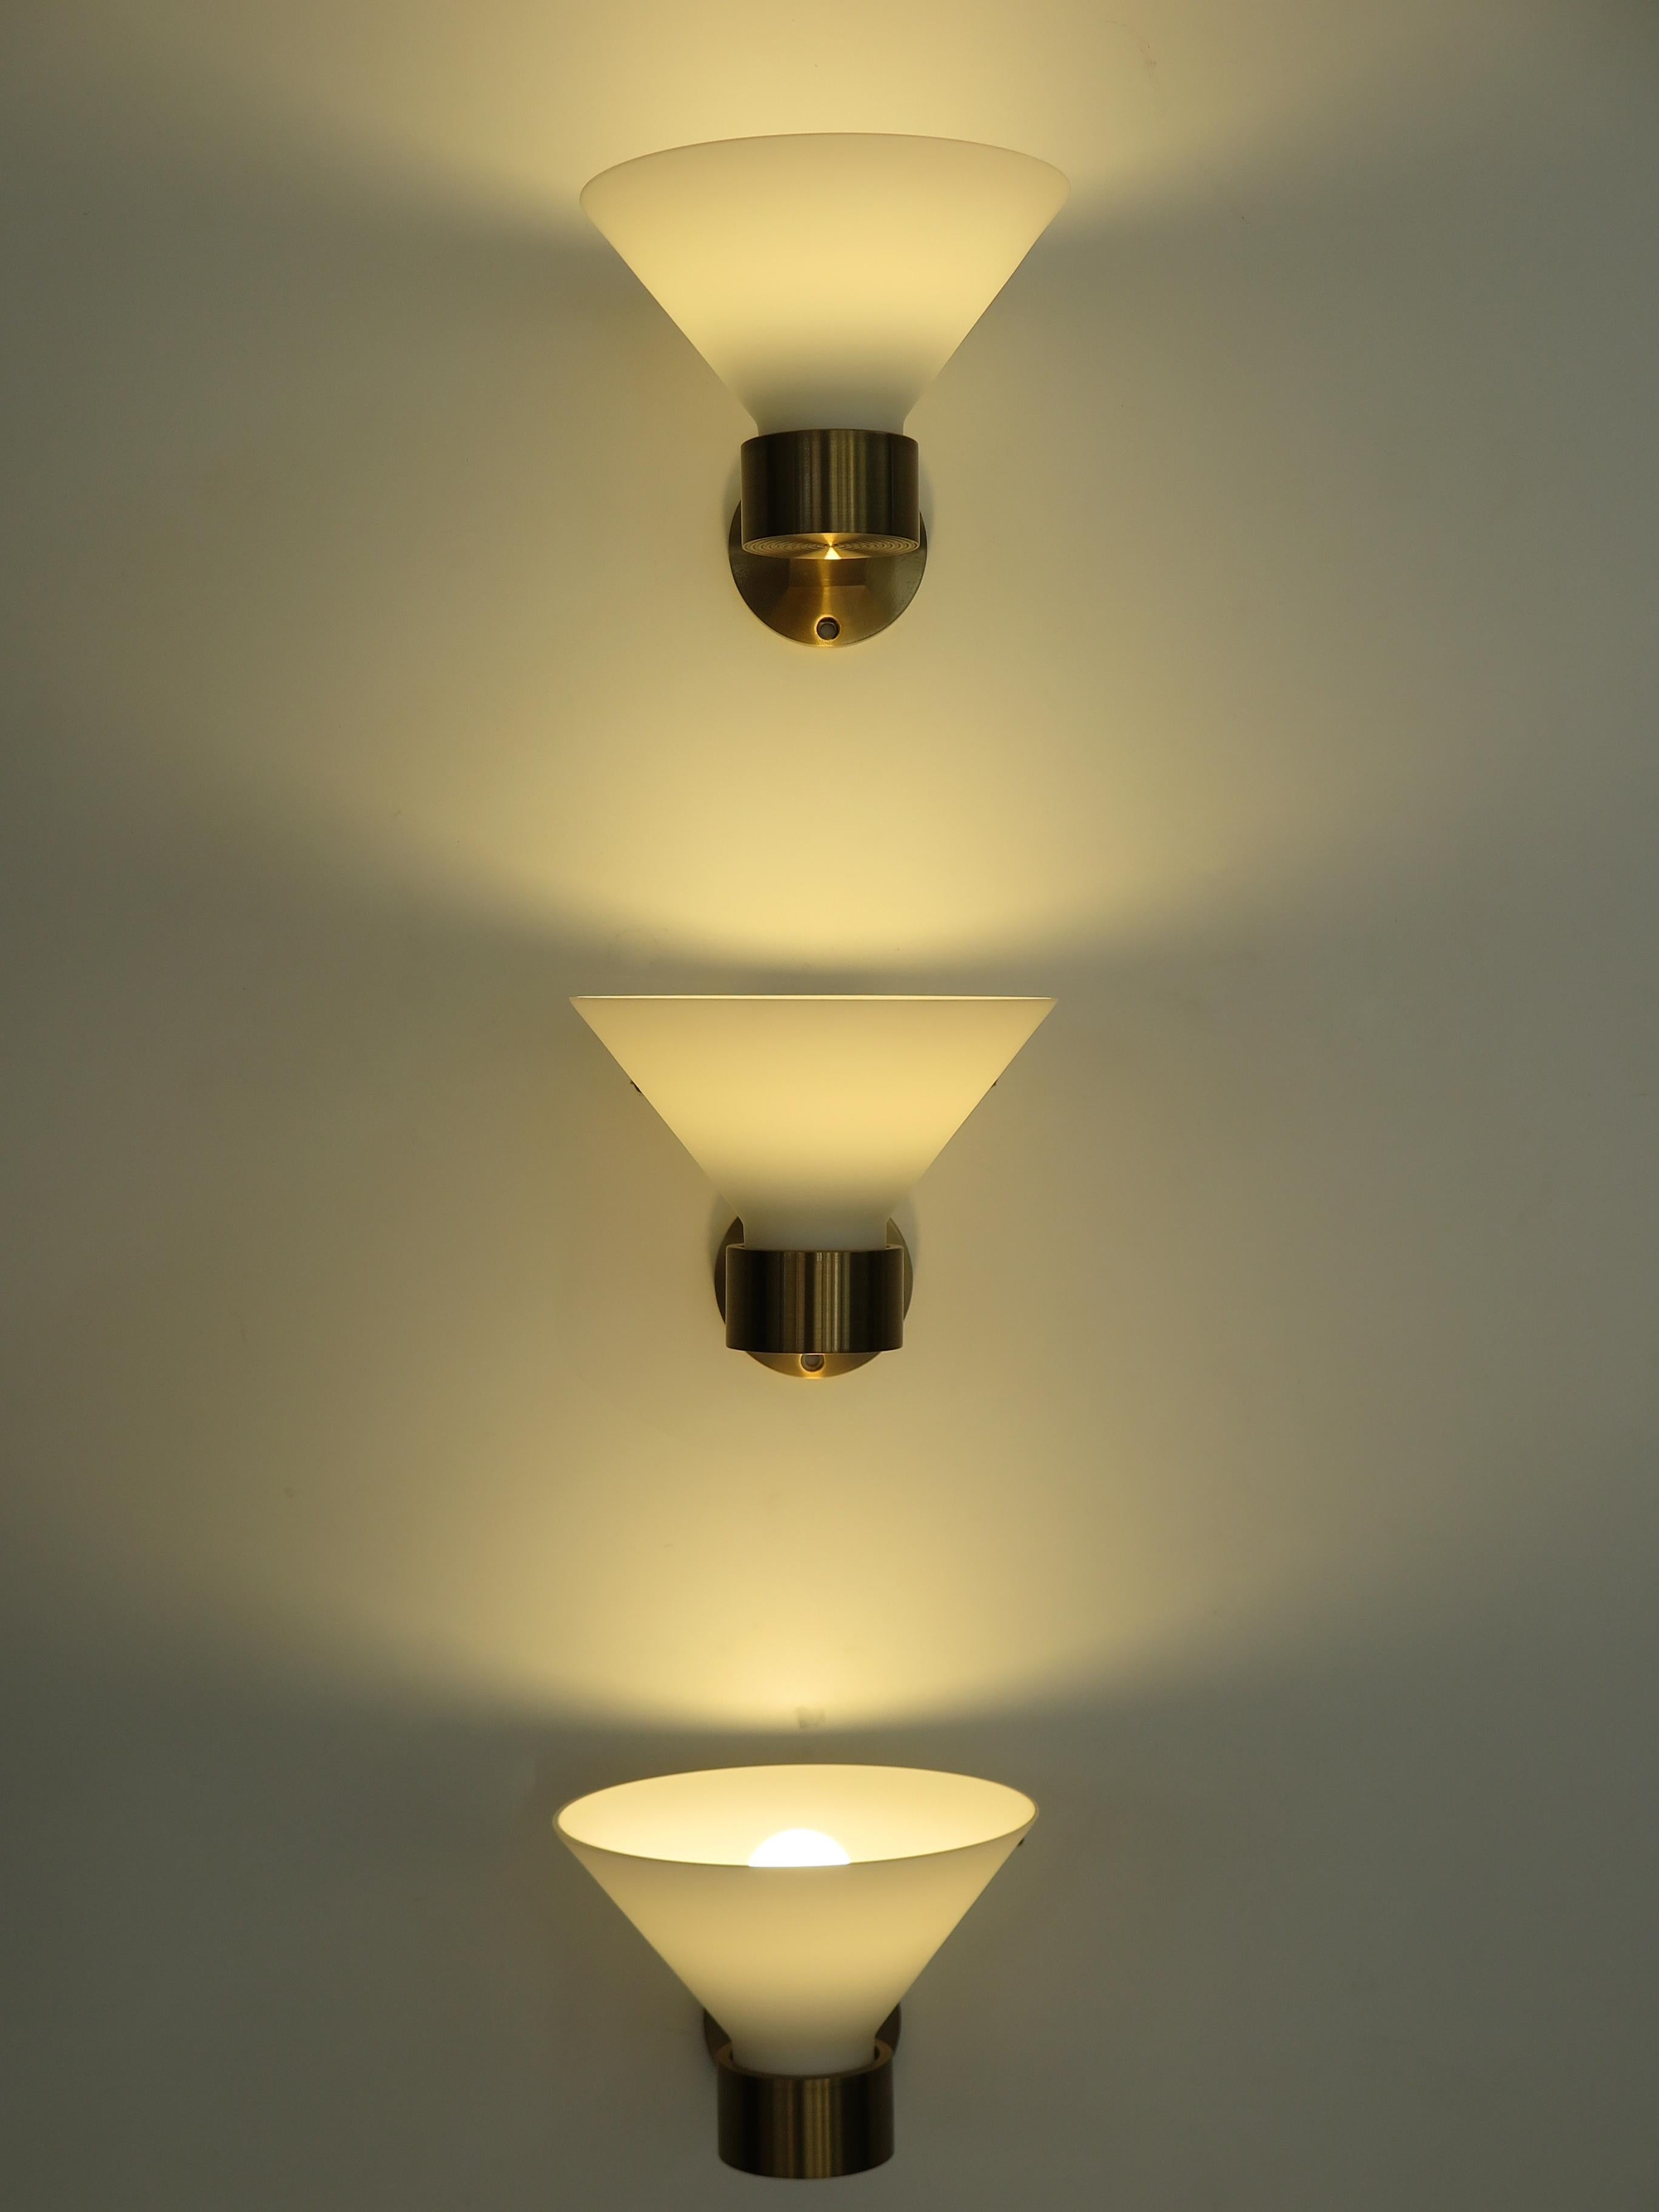 Set of three Italian wall sconces or wall lamps with solid brass frame and Murano glass lampshade, 1970s/80s.